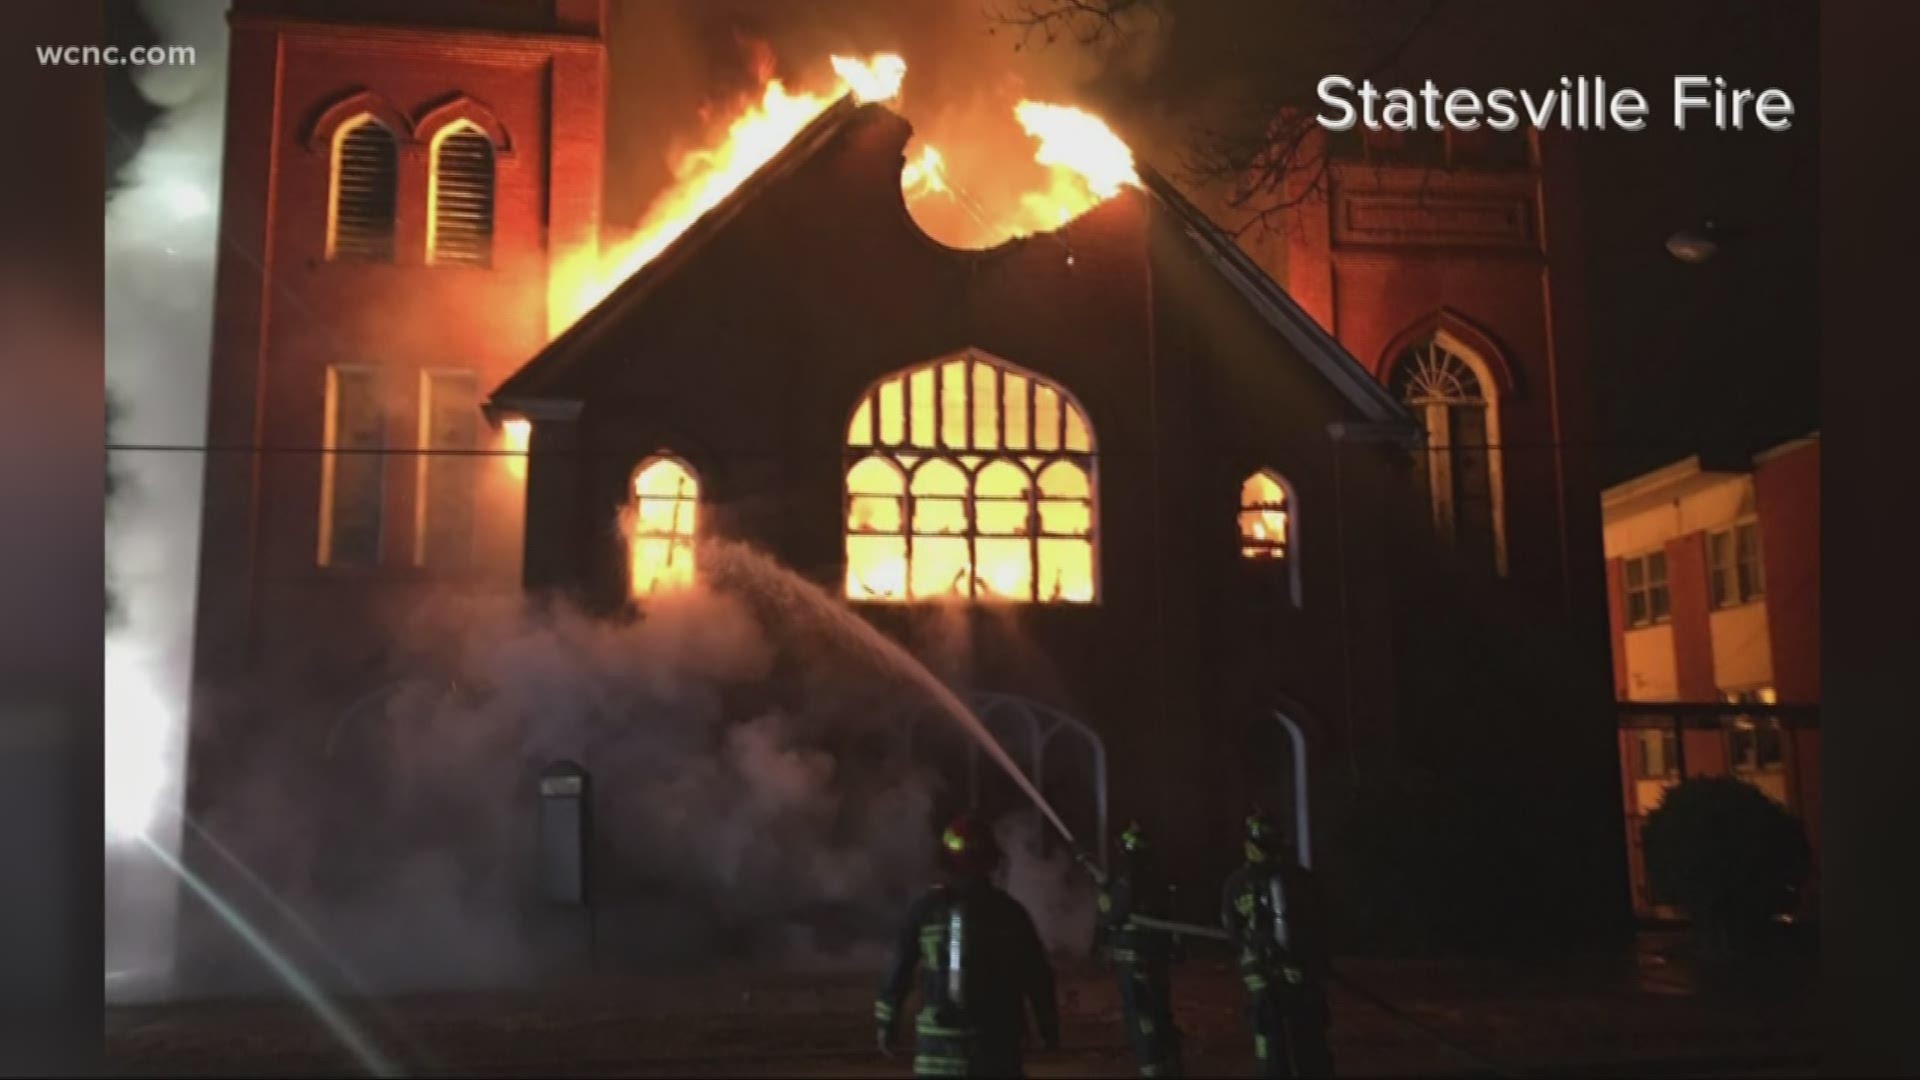 West Baptist Church in Statesville was destroyed during an overnight fire early Monday morning.